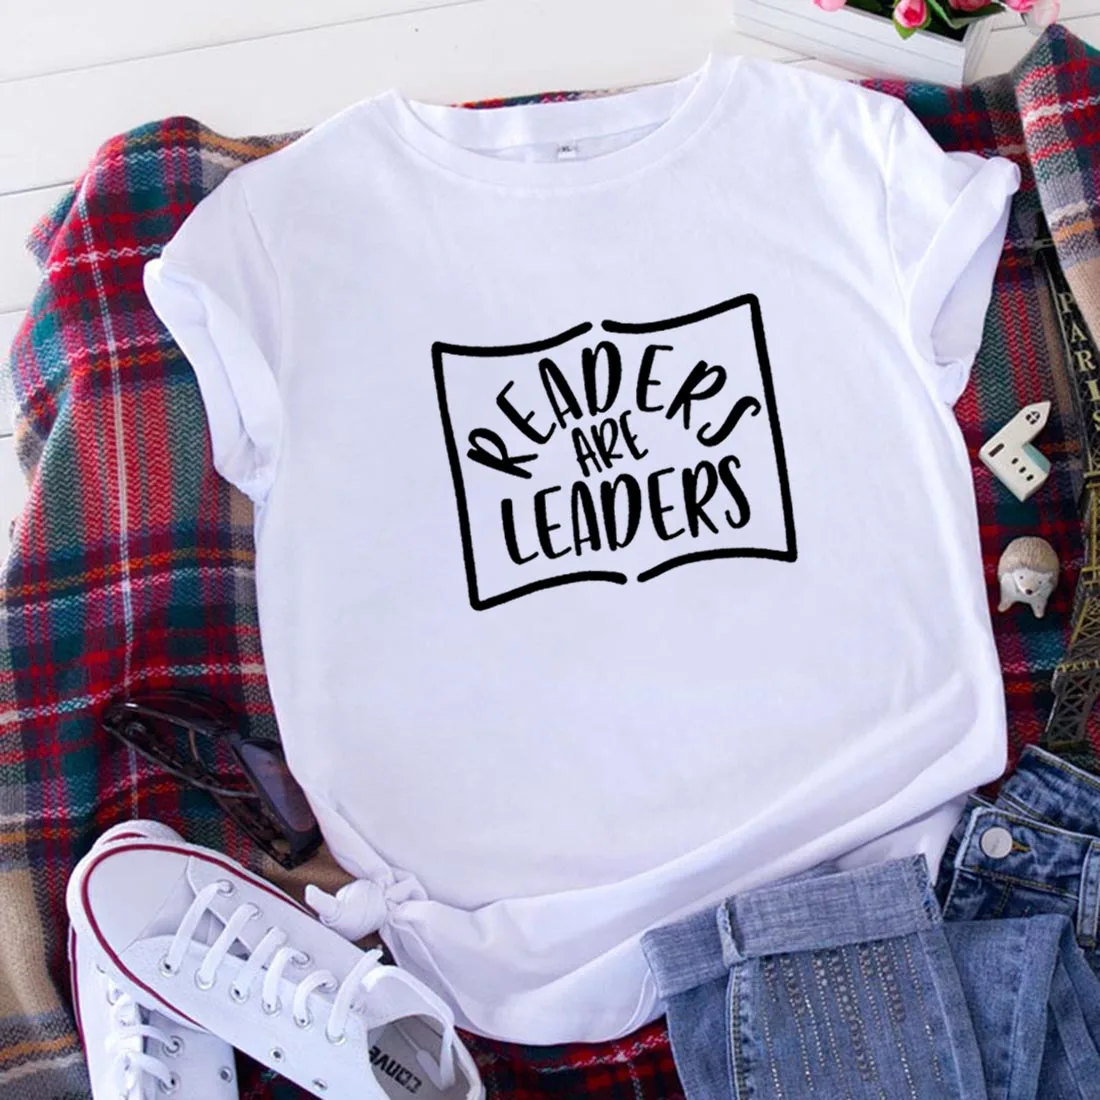 

Readers Are Leaders T Shirt Women Short Sleeve Tshirts Cotton Women O-neck Loose Tee Shirt Femme Black White Camisetas Mujer Top